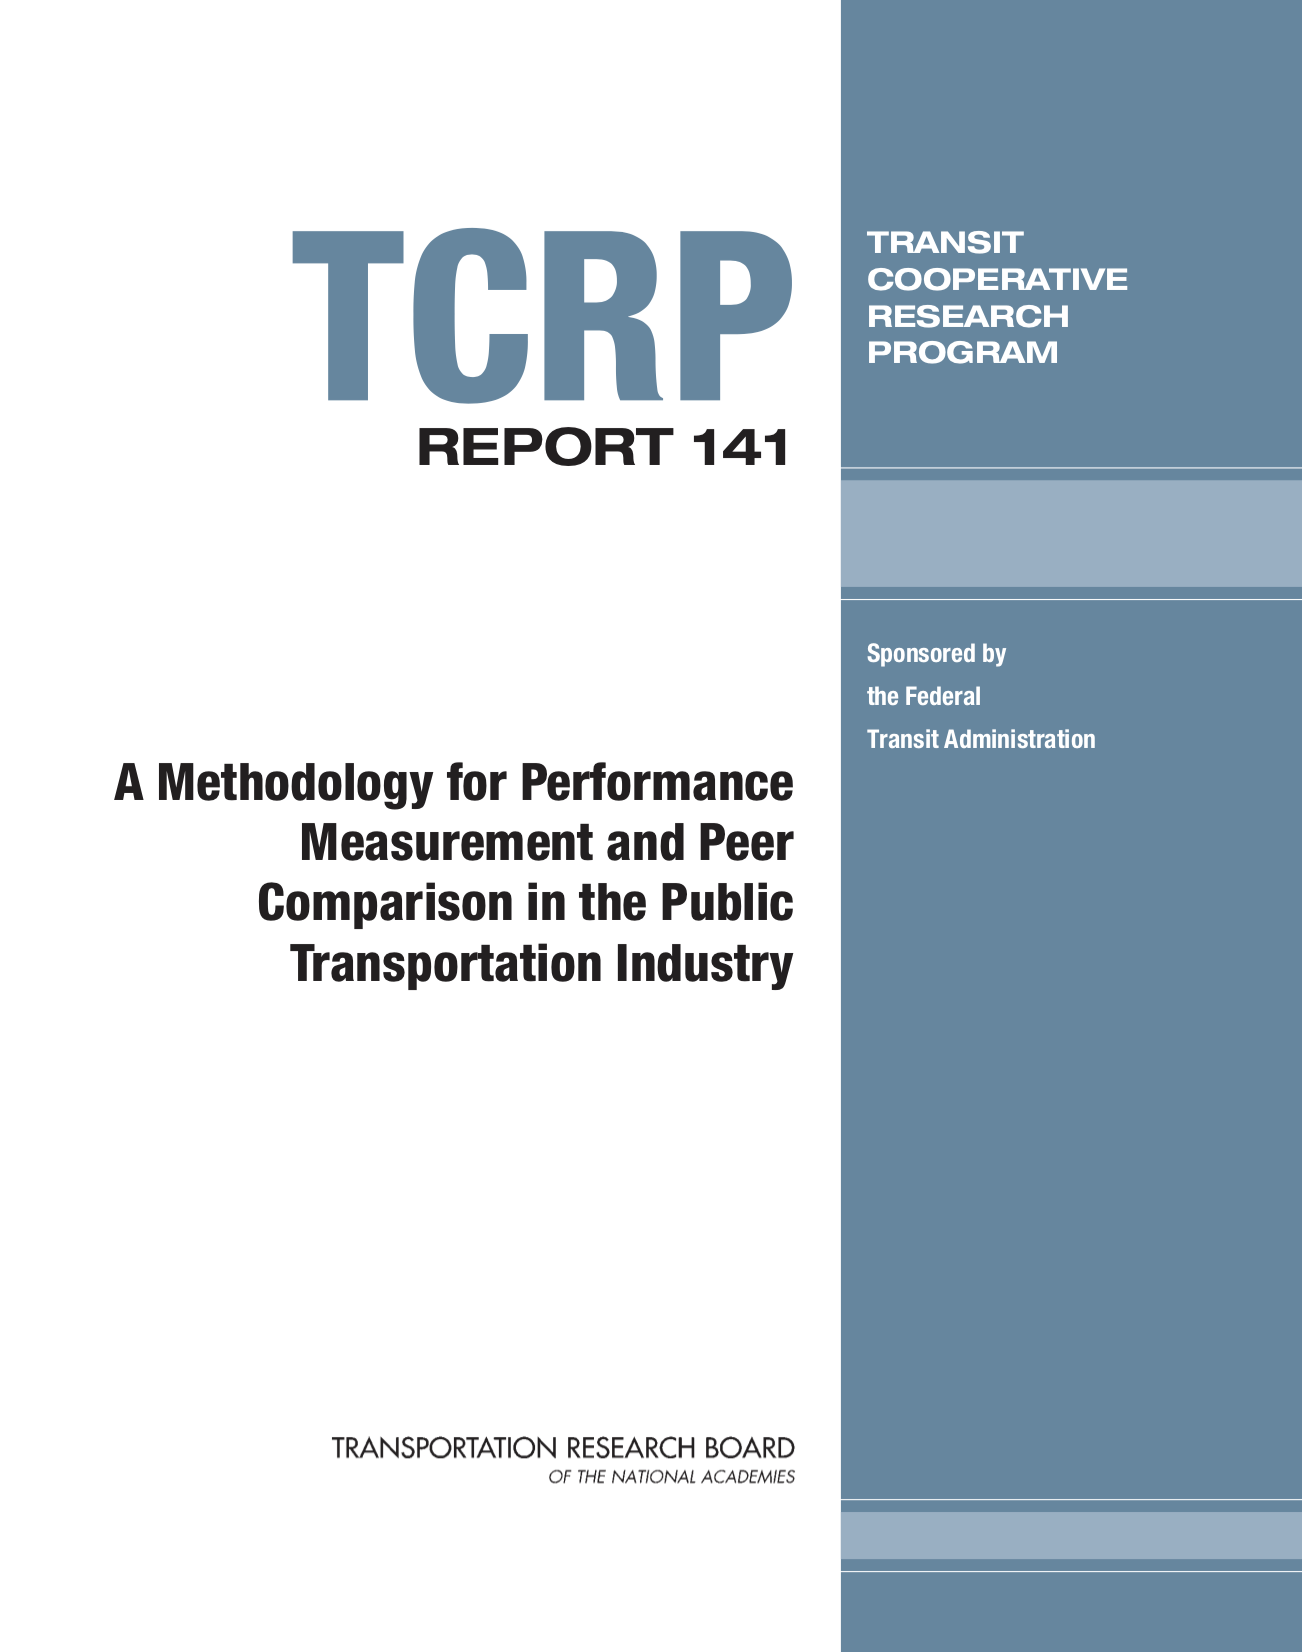 TCRP Report 141: A Methodology for Performance Measurement and Peer Comparison in the Public Transportation Industry [PUB]